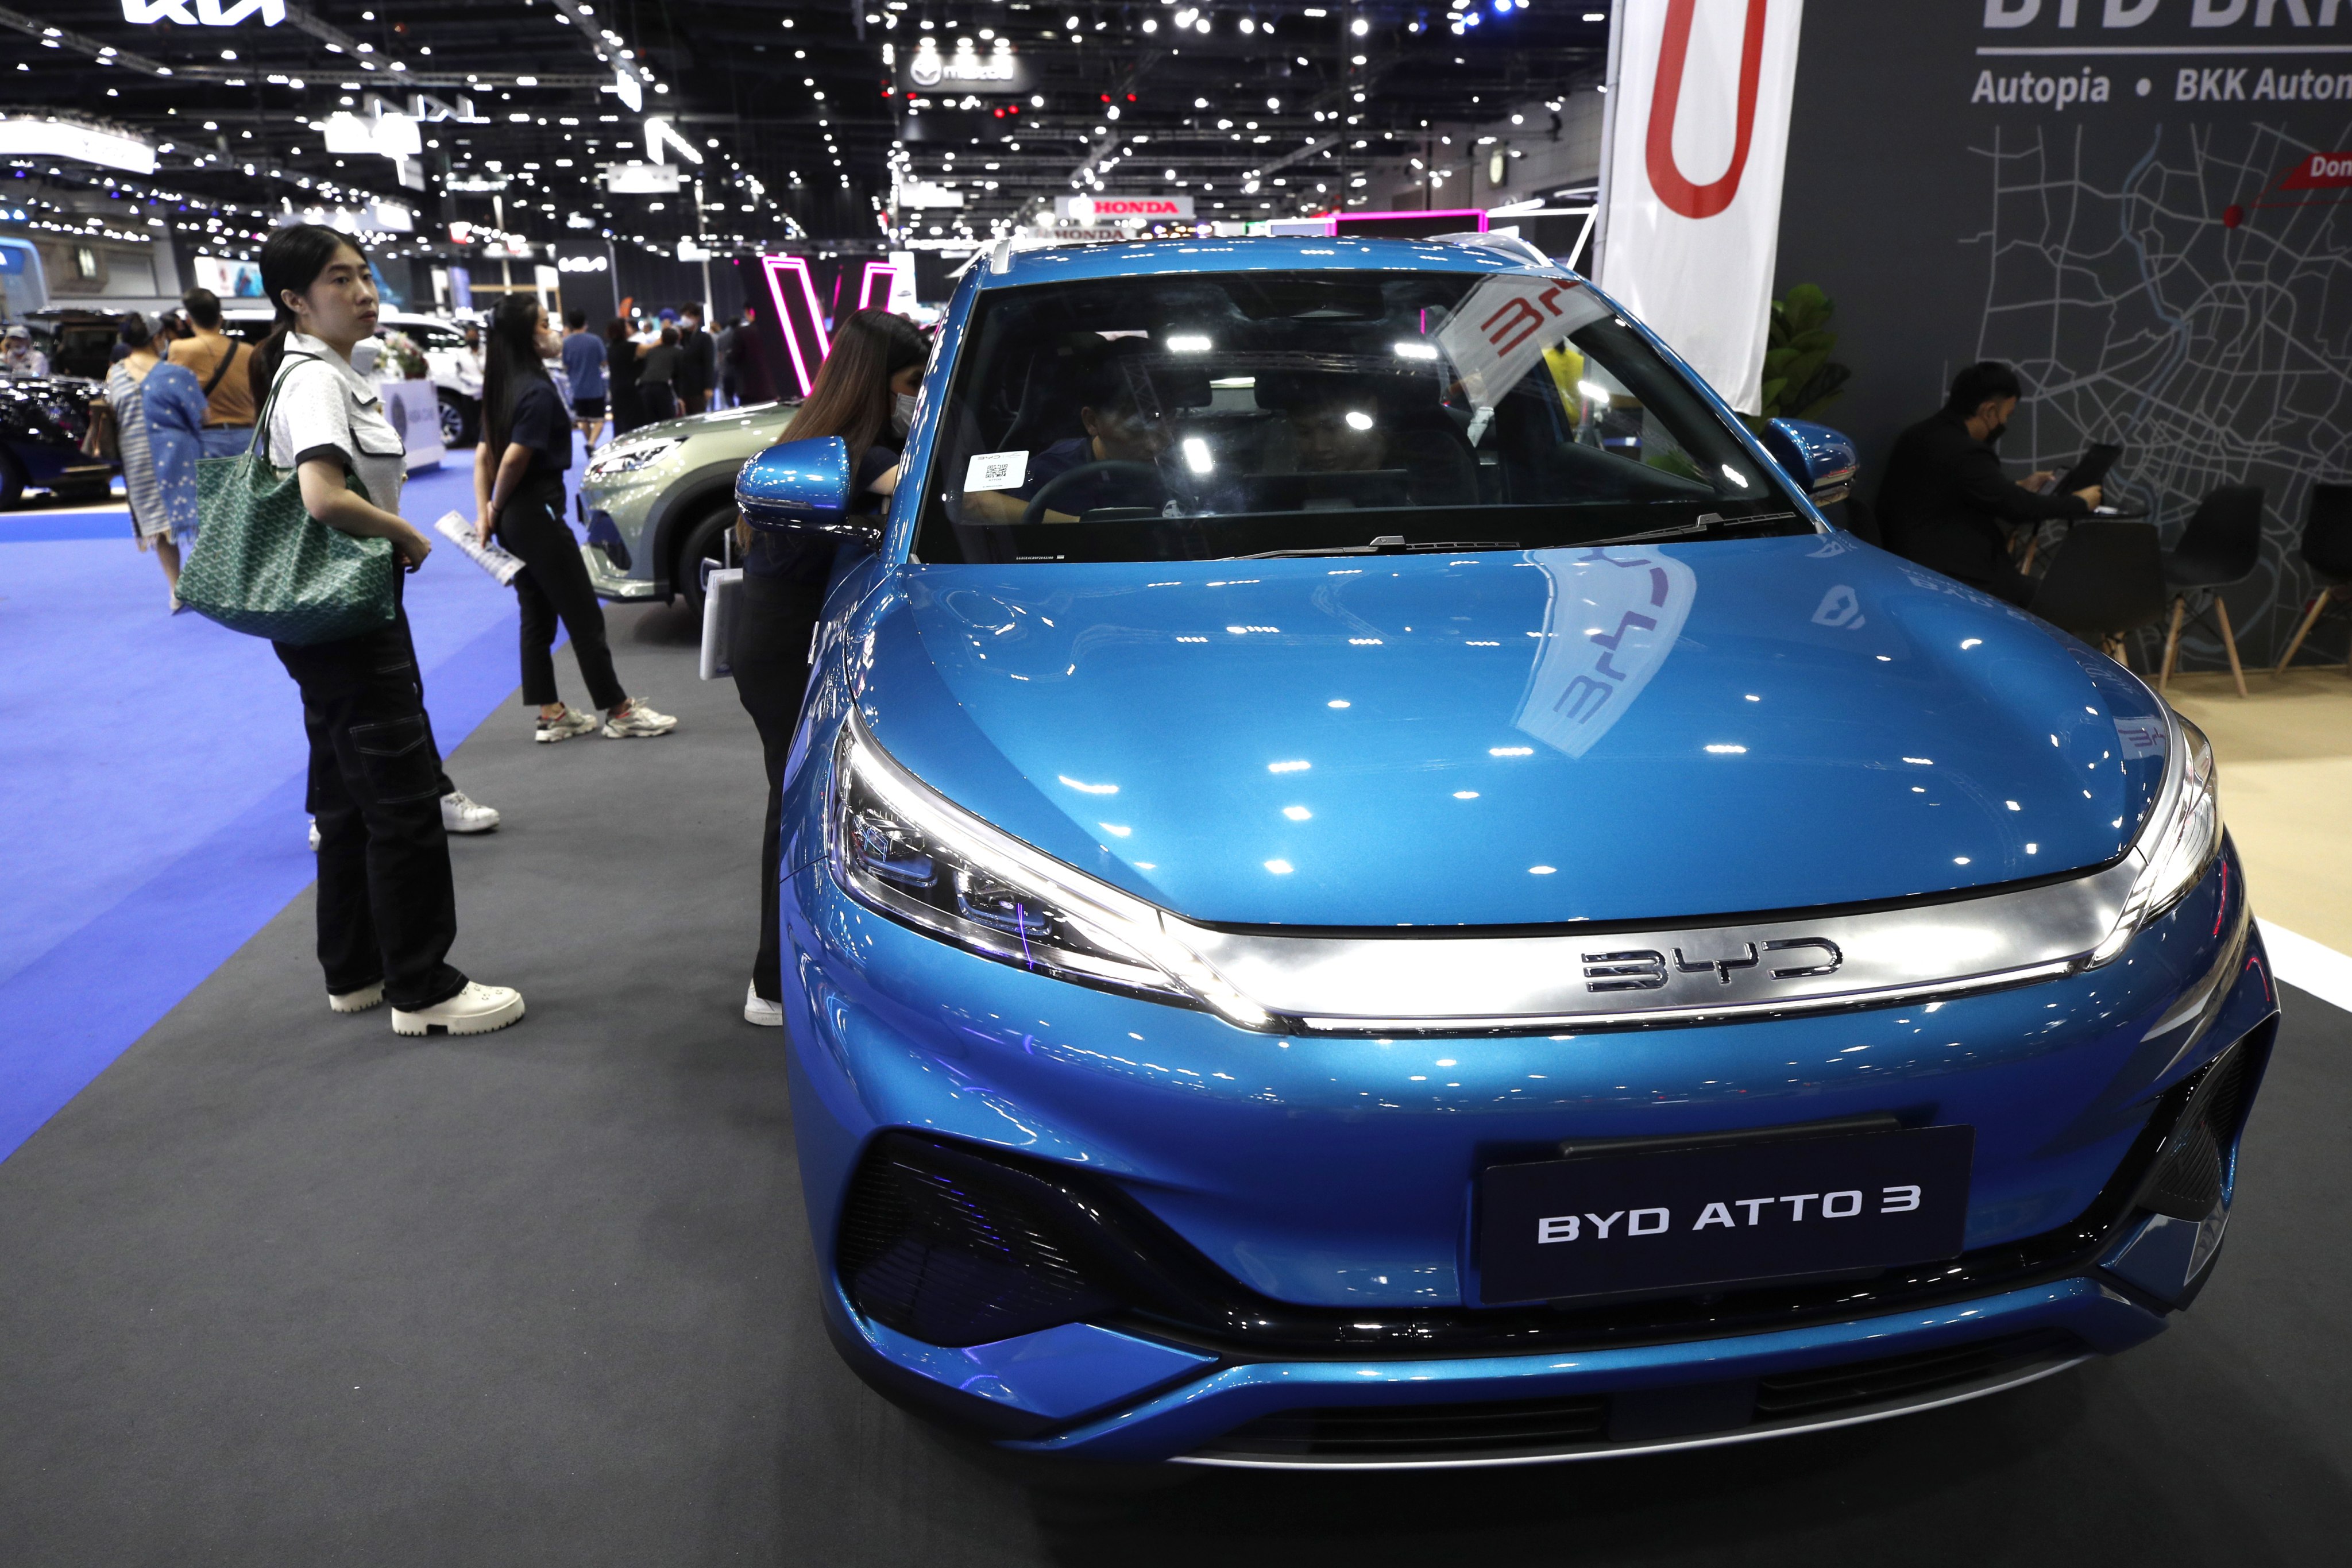 Visitors look at BYD’s ATTO 3 electric car at the Big 2023 Motor Sale trade event in Bangkok, on Monday. Photo: EPA-EFE